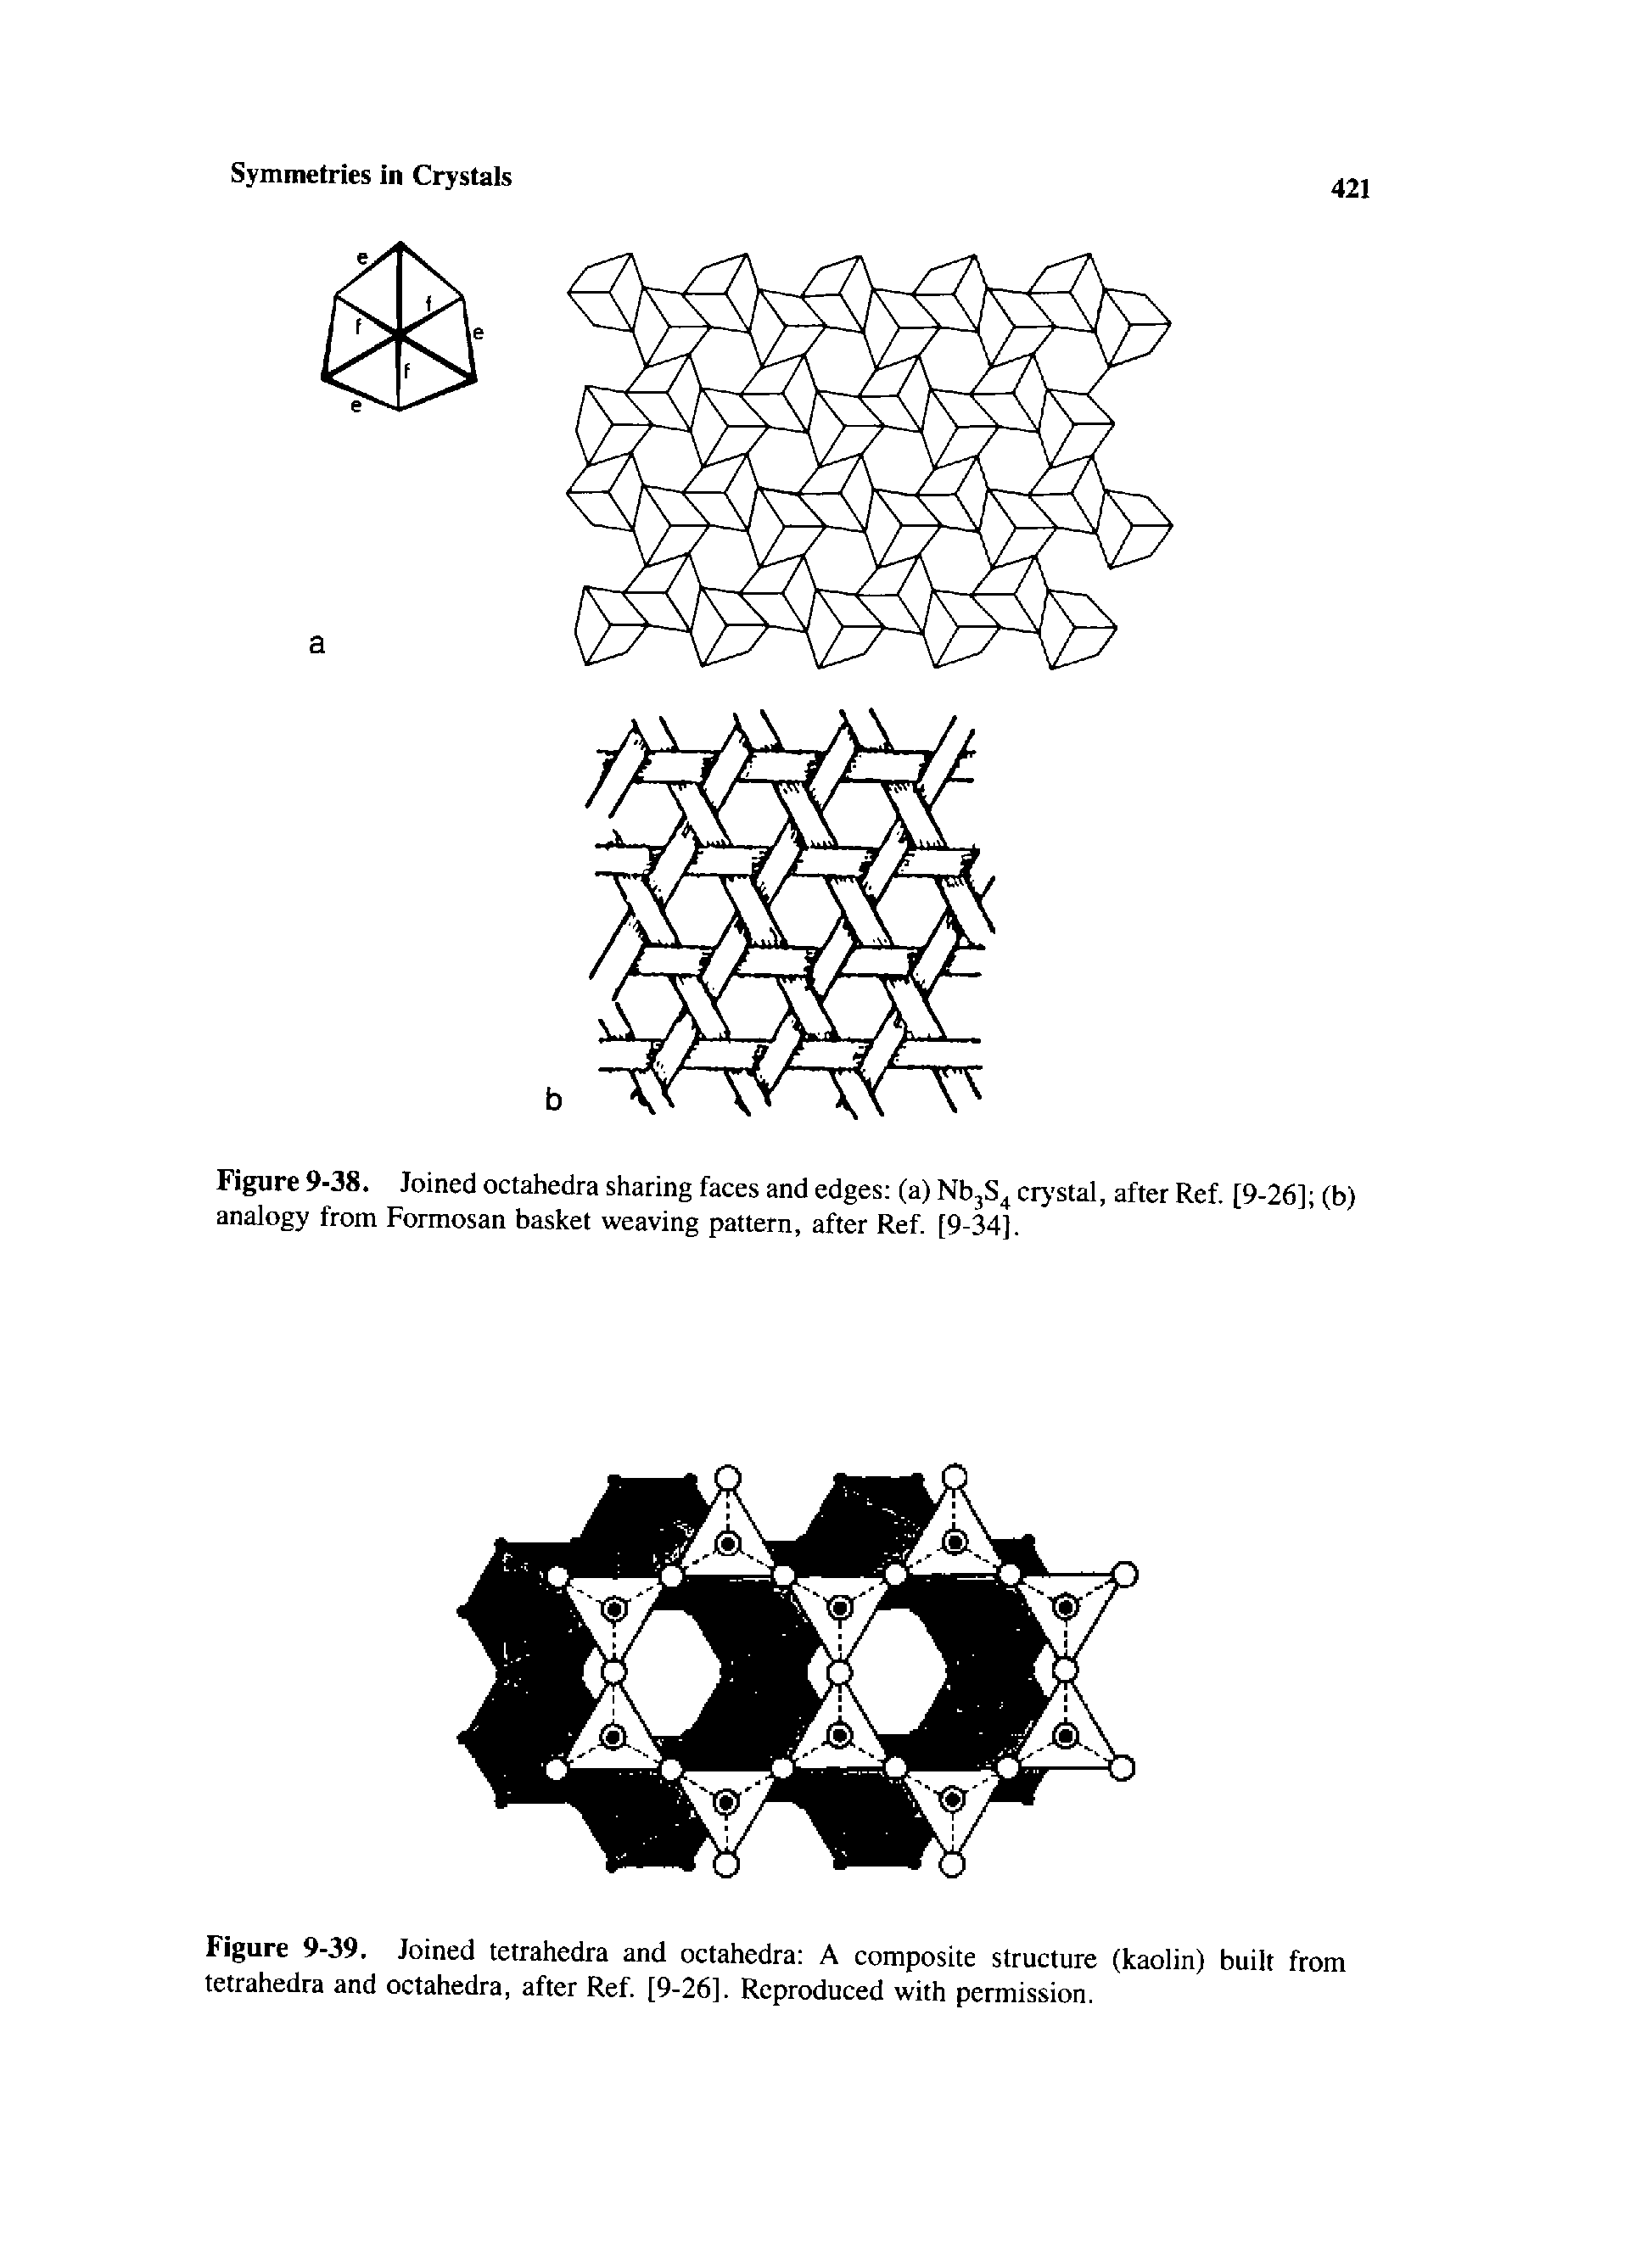 Figure 9-38. Joined octahedra sharing faces and edges (a) NbjS crystal, after Ref. [9-26] (b) analogy from Formosan basket weaving pattern, after Ref. [9-34].